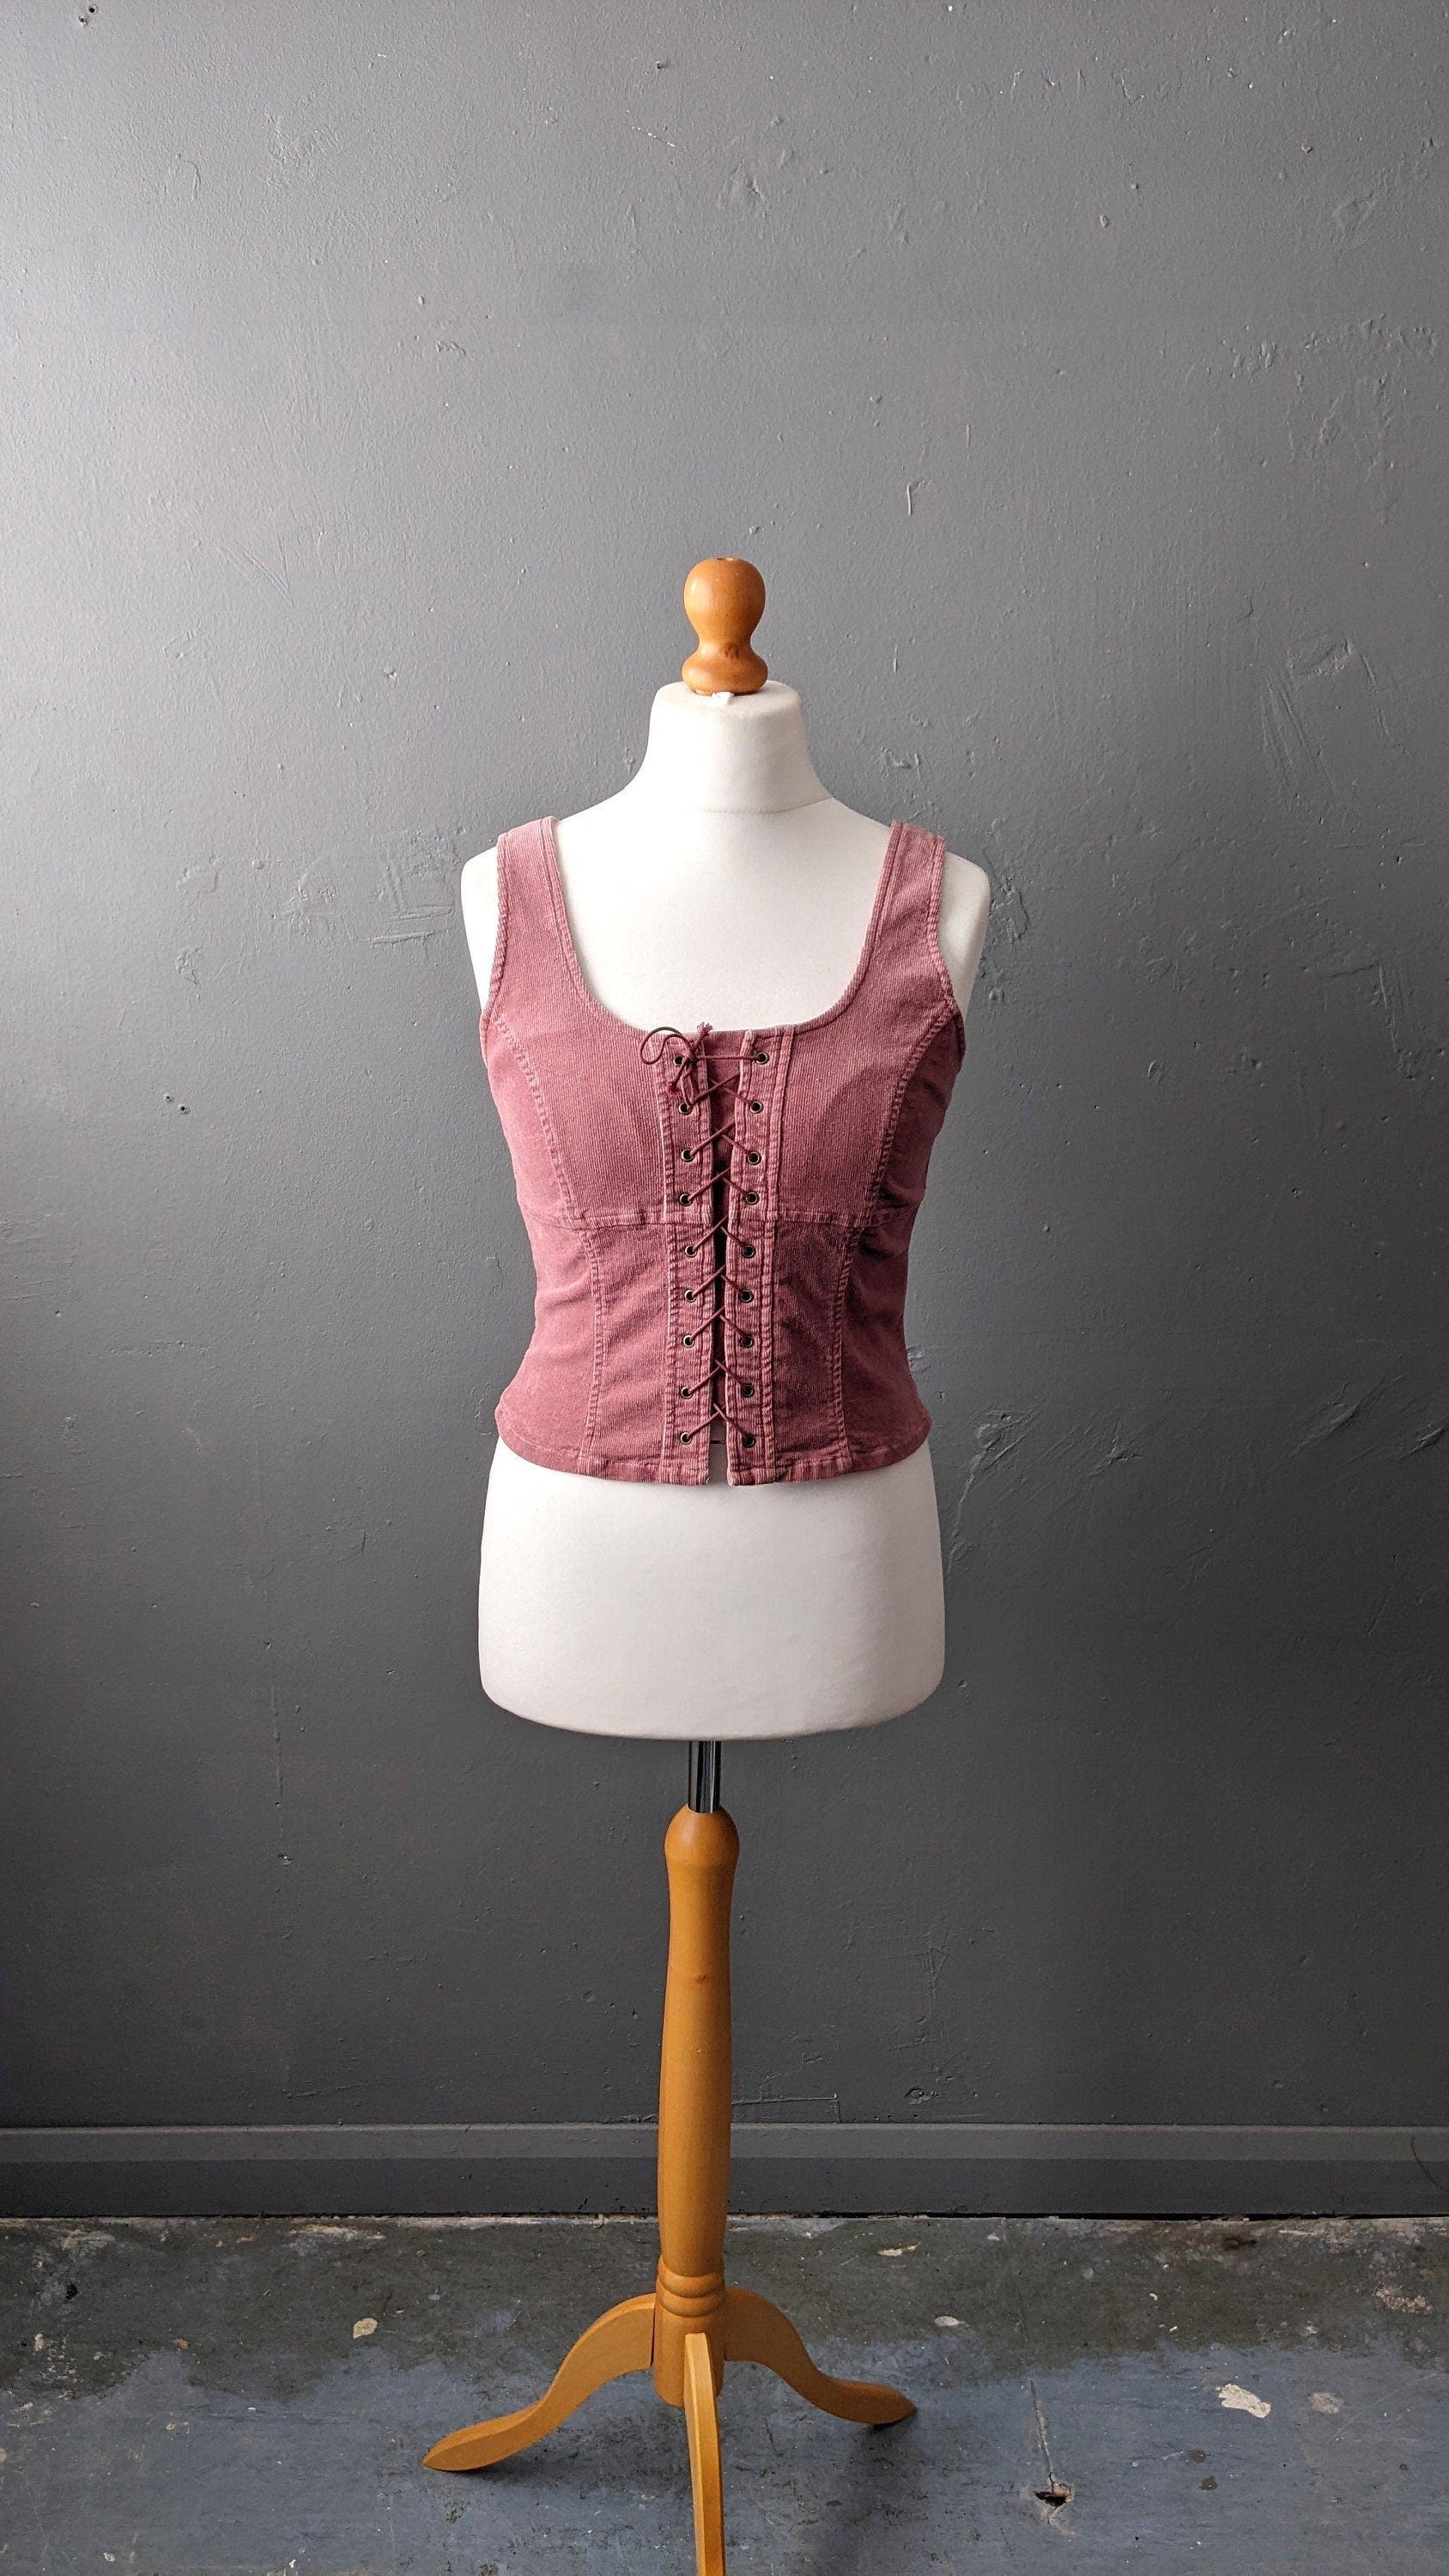 90s Pink Corduroy Bodice Vest with Front Lacing, Size Medium